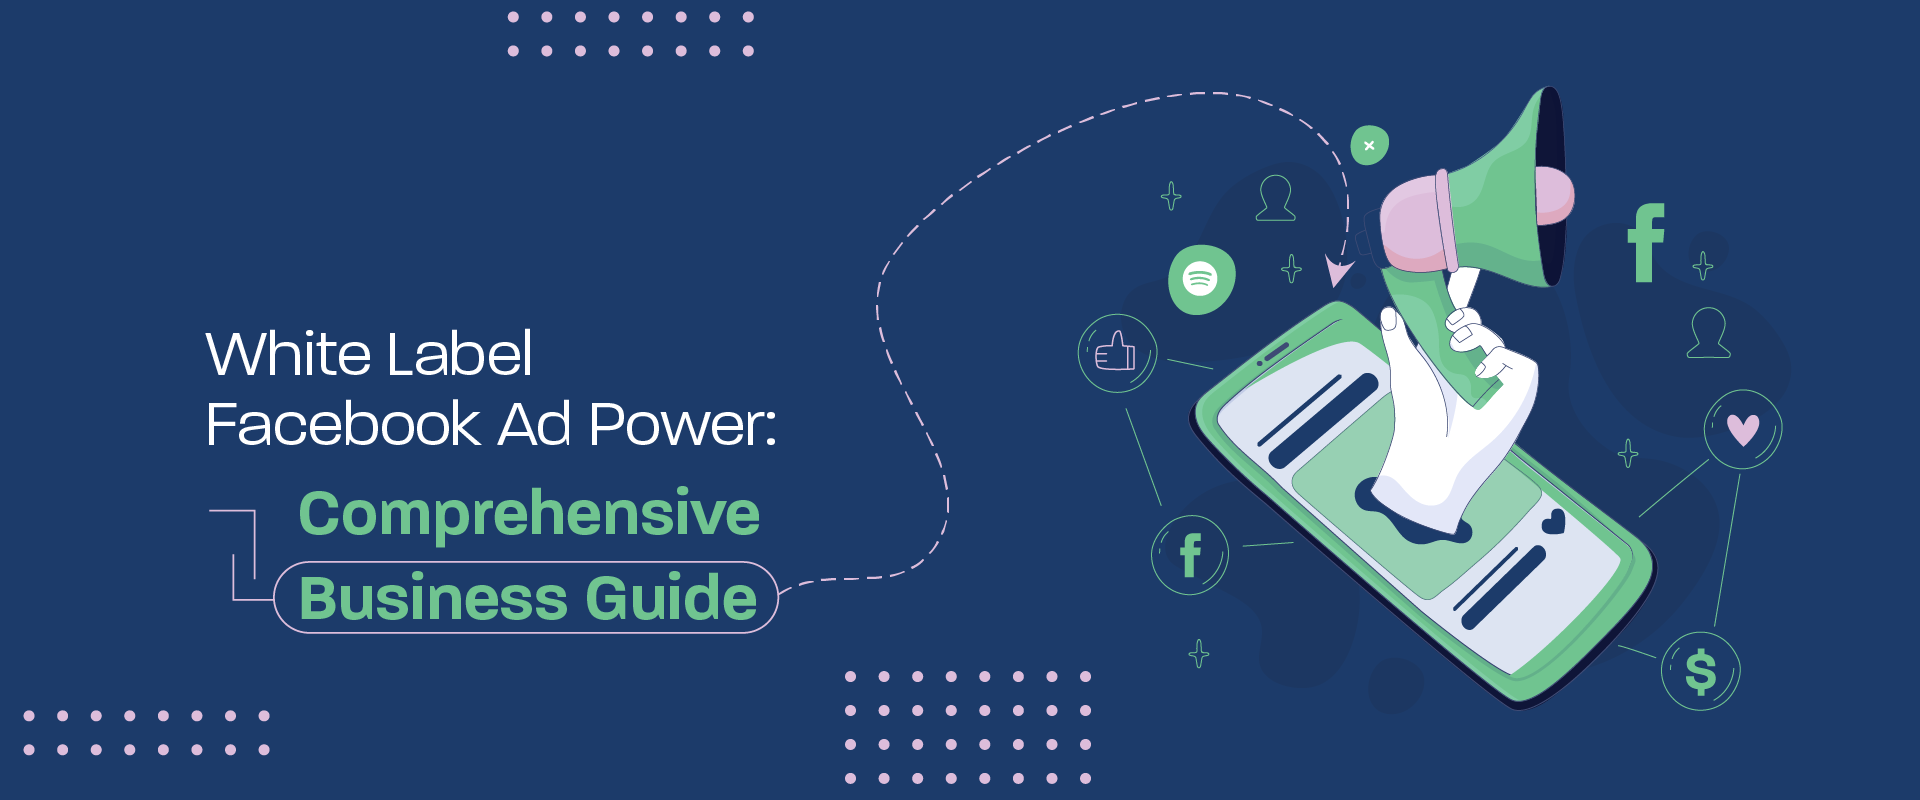 White Label Facebook Ad Power: Comprehensive Business Guide